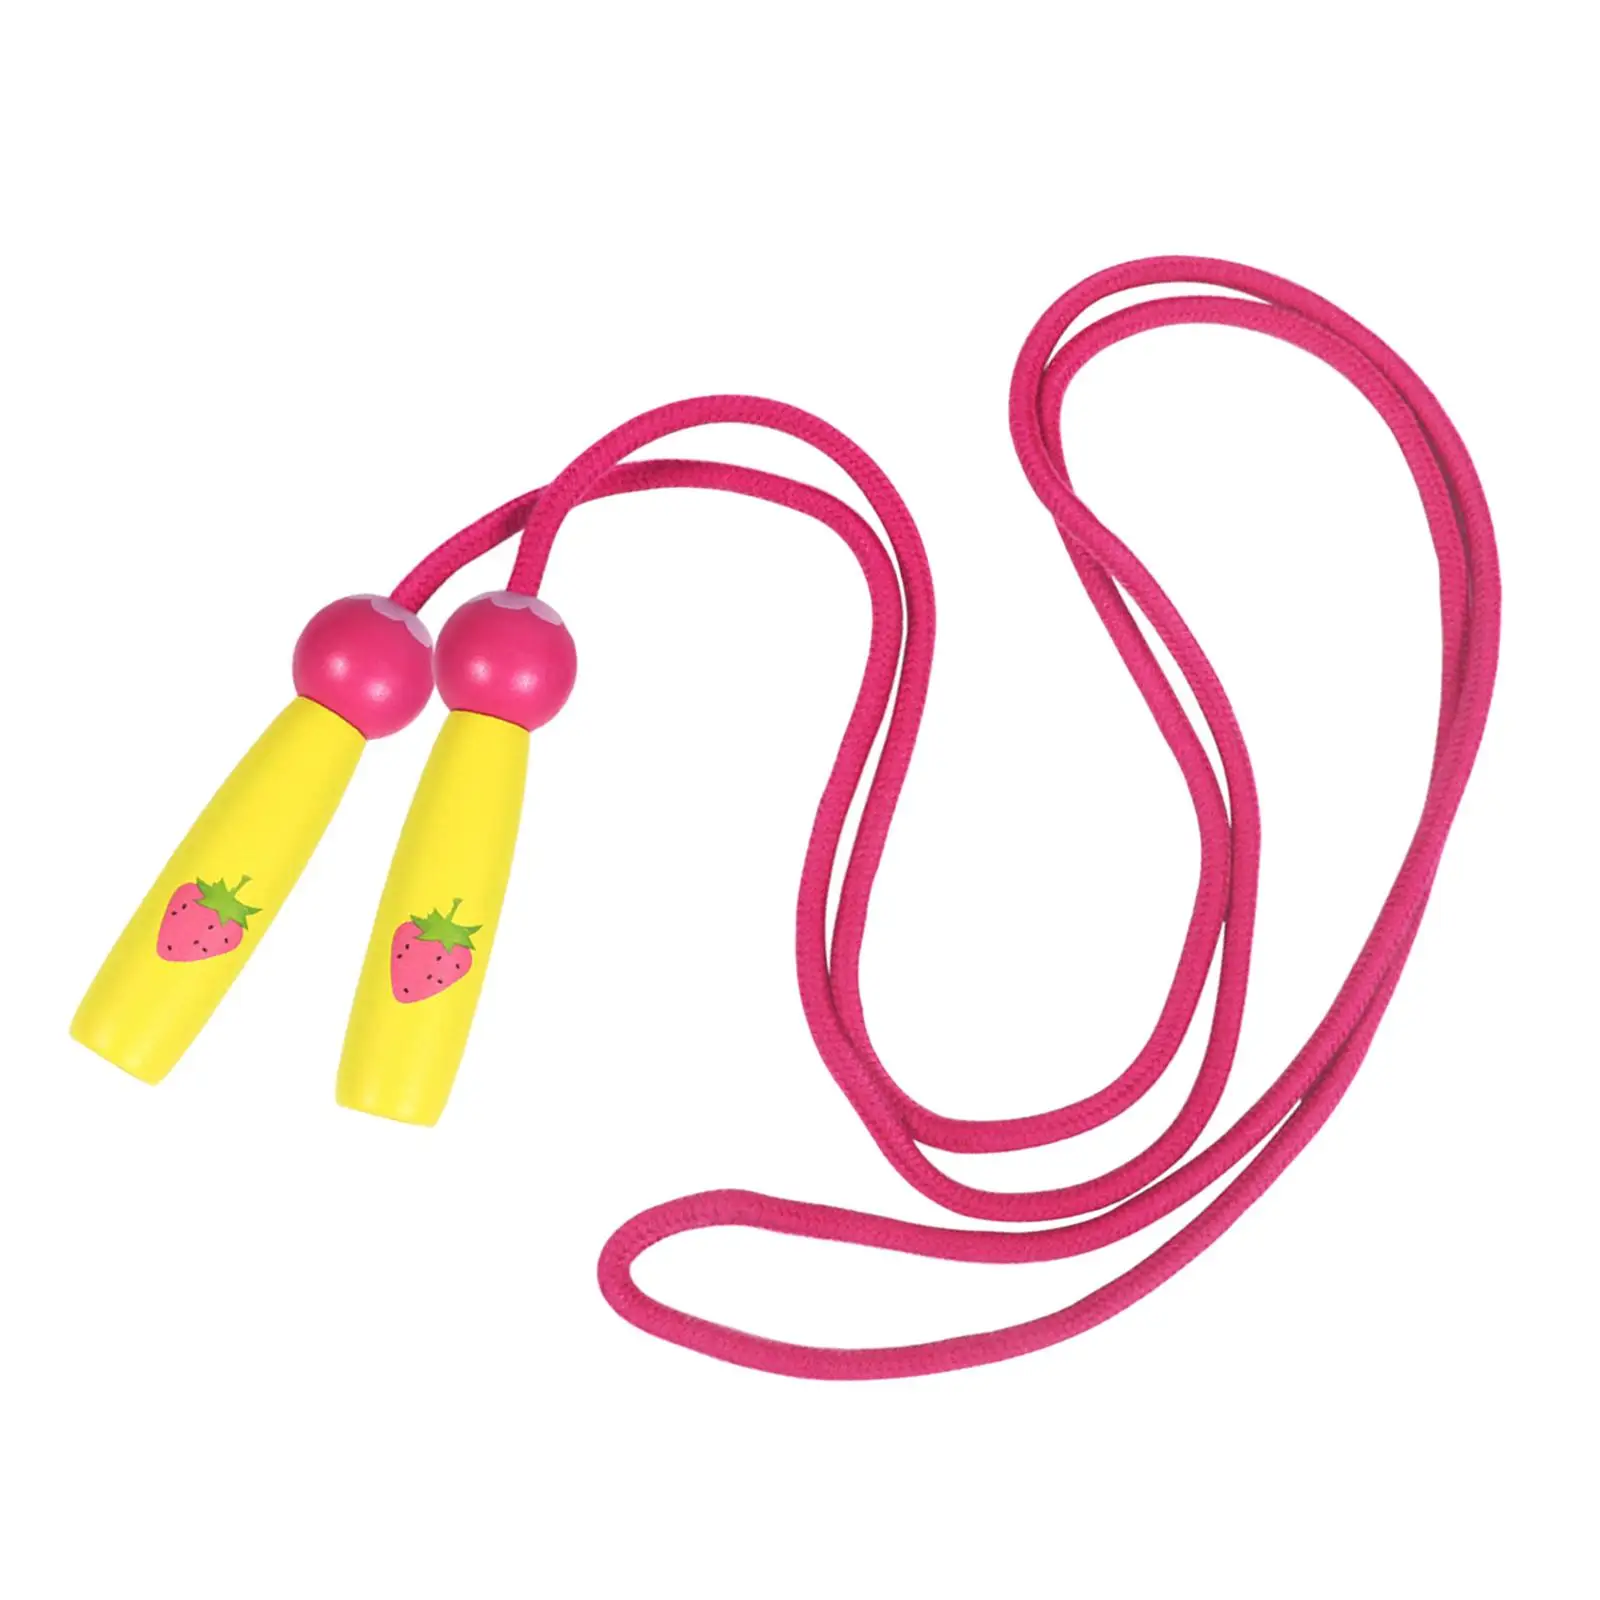 Cotton Jump Rope Adjustable Jumping Rope Activities Favors Skipping Rope